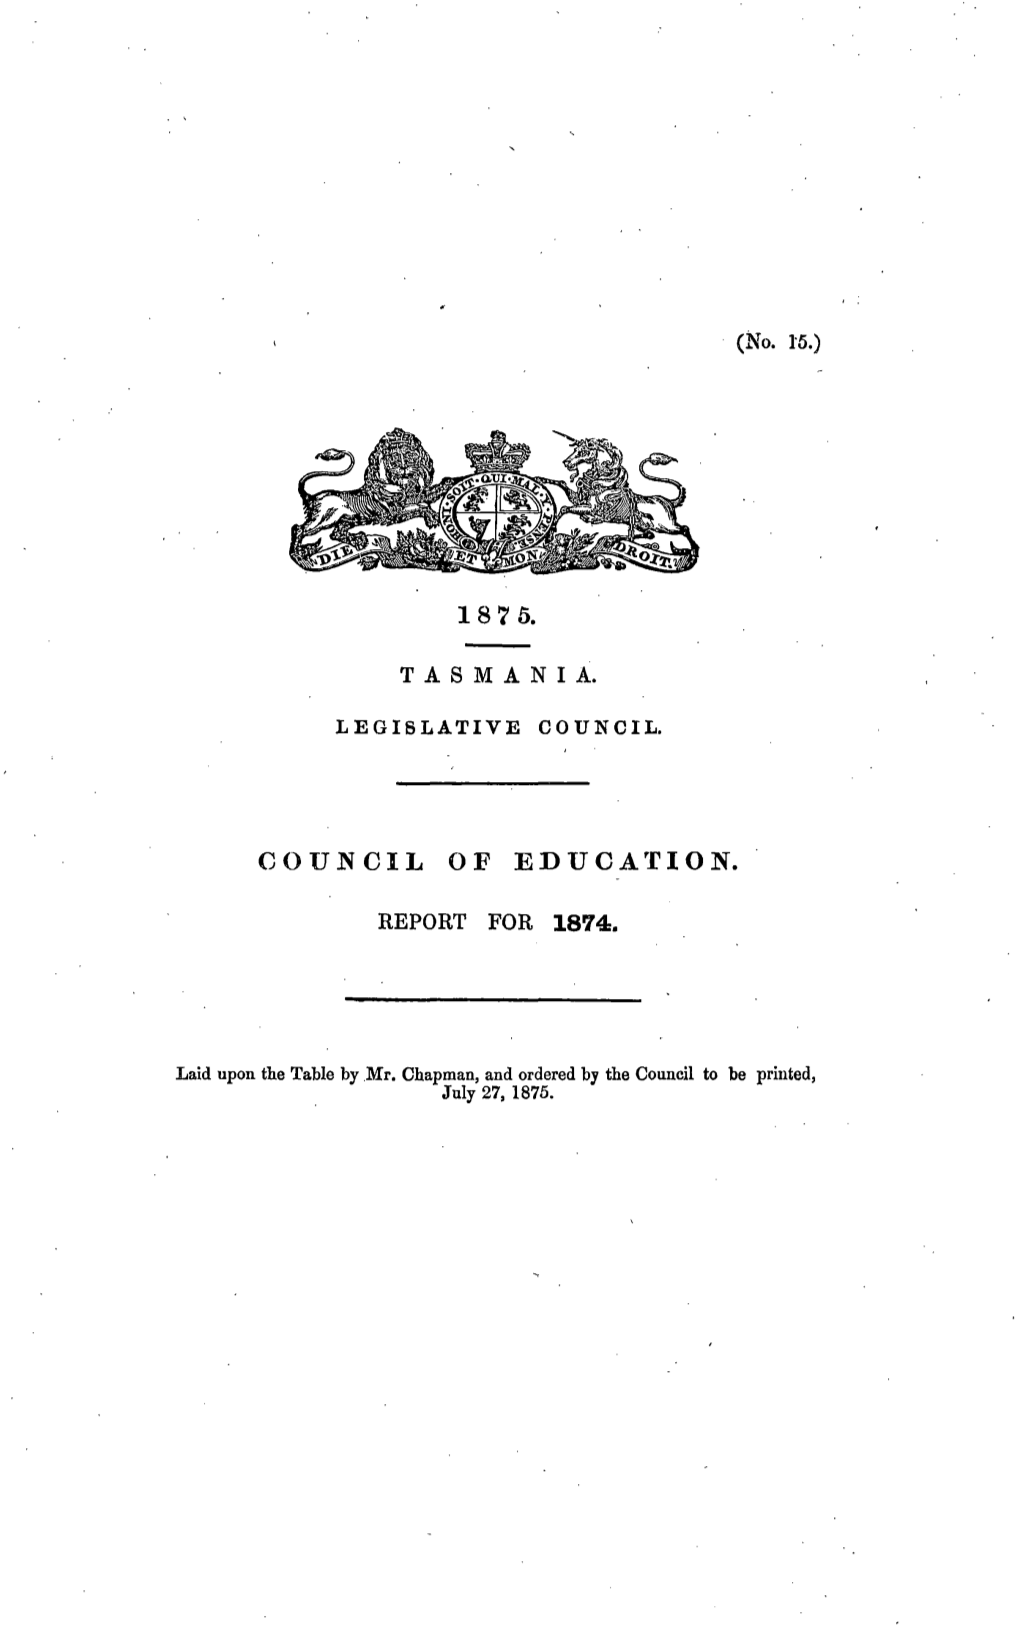 Council of Education Report for 1874